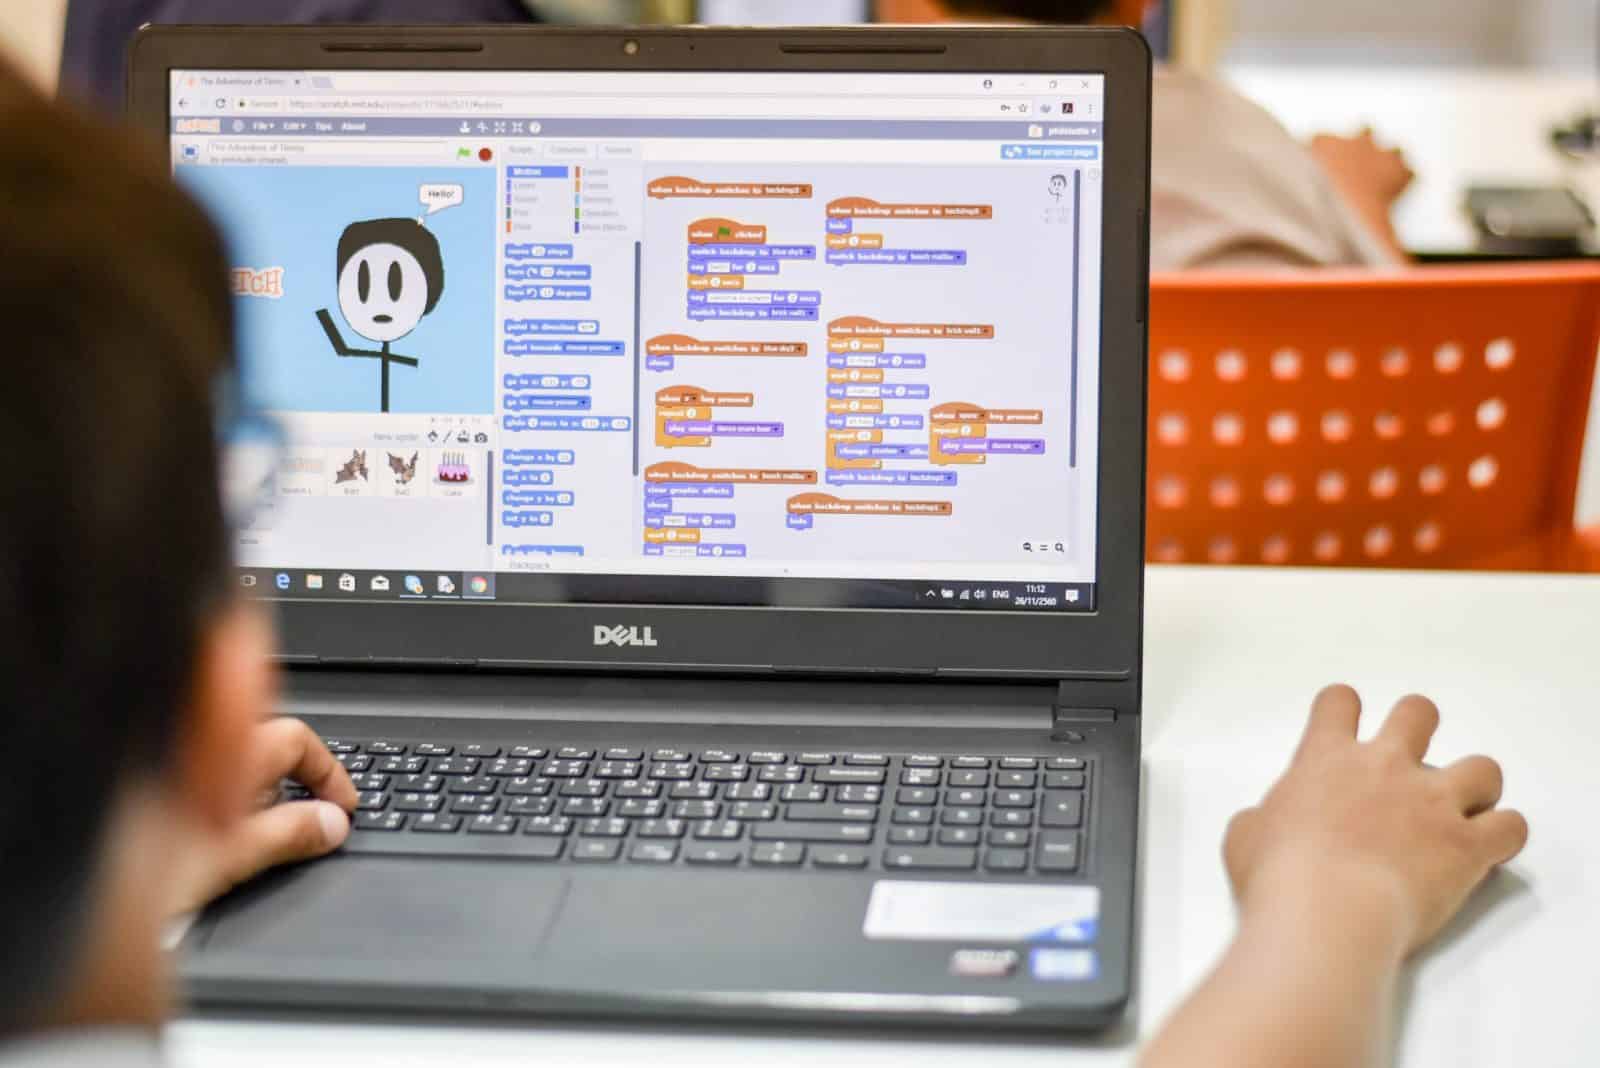 How do I Learn Scratch? Coding with Scratch for Kids, Explained